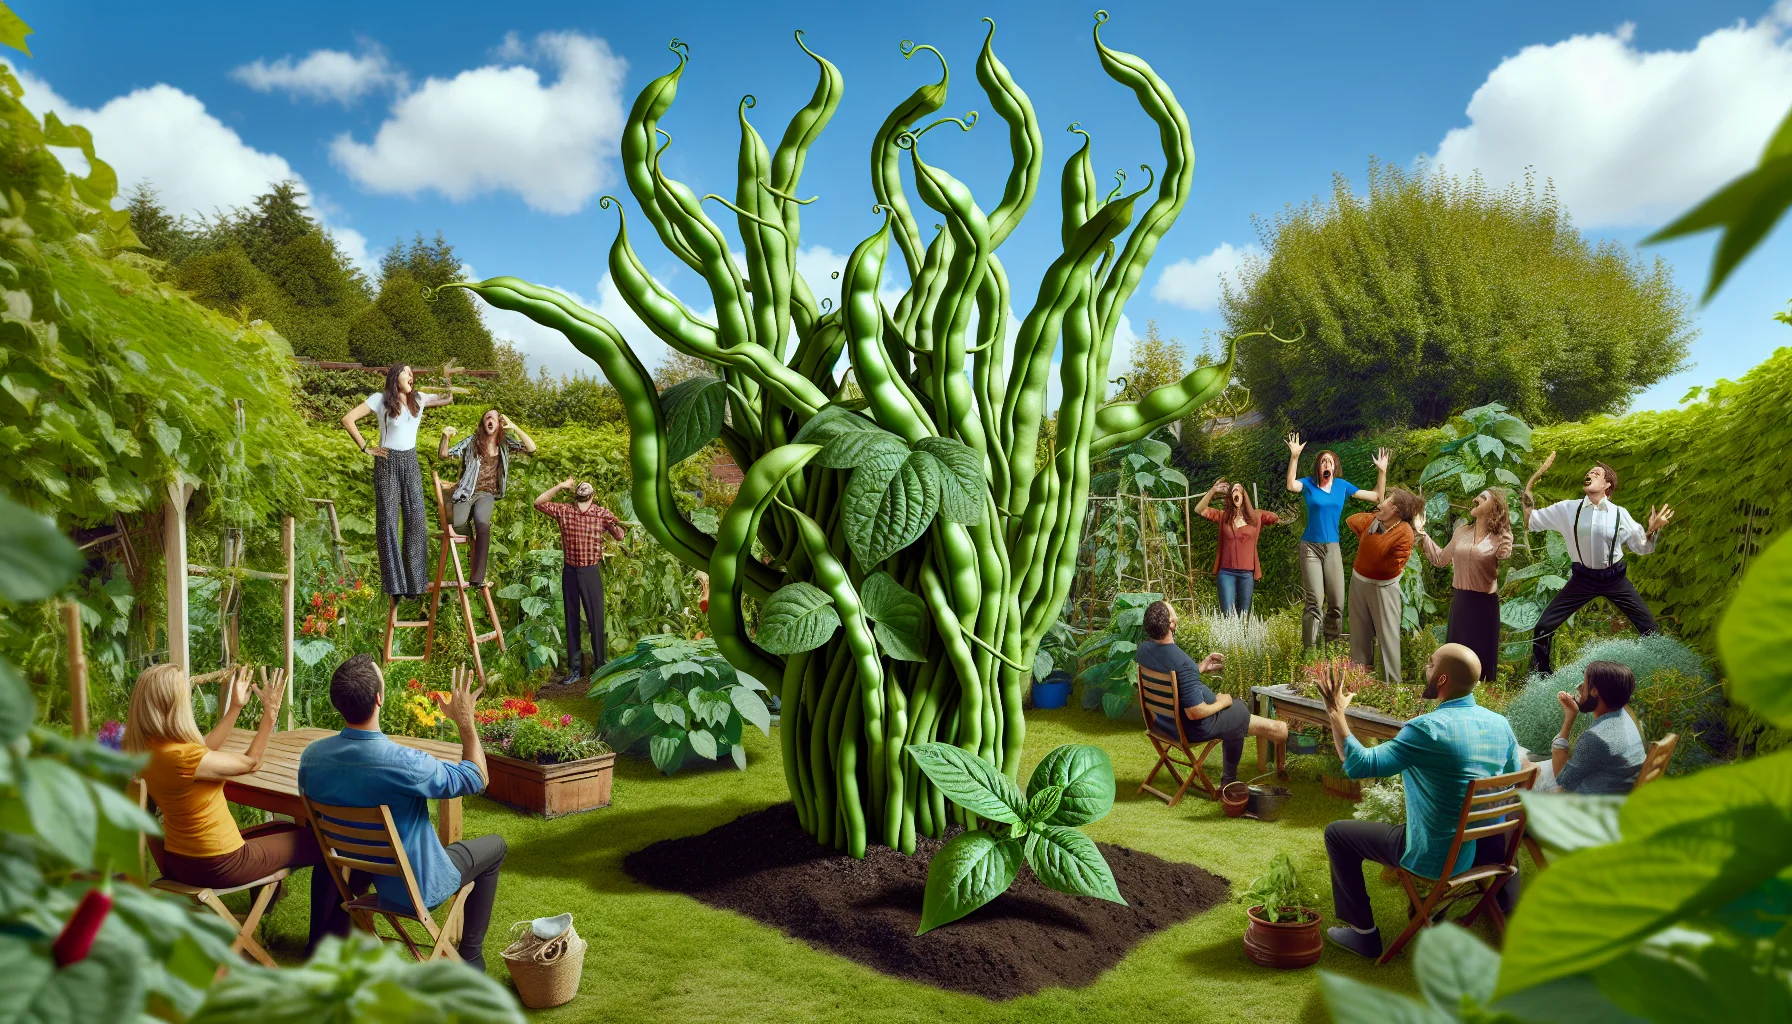 Imagine a humorous and interactive scene set in a vibrant backyard garden. Centered amongst a variety of flourishing plant life, focus on a lush, green bean plant. Its vines are twisty, reaching upwards confidently towards the sky, and it is heavy with ripe, trim green beans. Suddenly, these beans spring to life, dramatically acting out scenes from a popular play with exaggerated expressions and actions. The sight is so engaging, onlookers, consisting of a diverse group of individuals of different genders and descents, can't help but chuckle and share amused glances. They seem compelled to try their hands at gardening, drawn in by the enchanting and humorous spectacle.